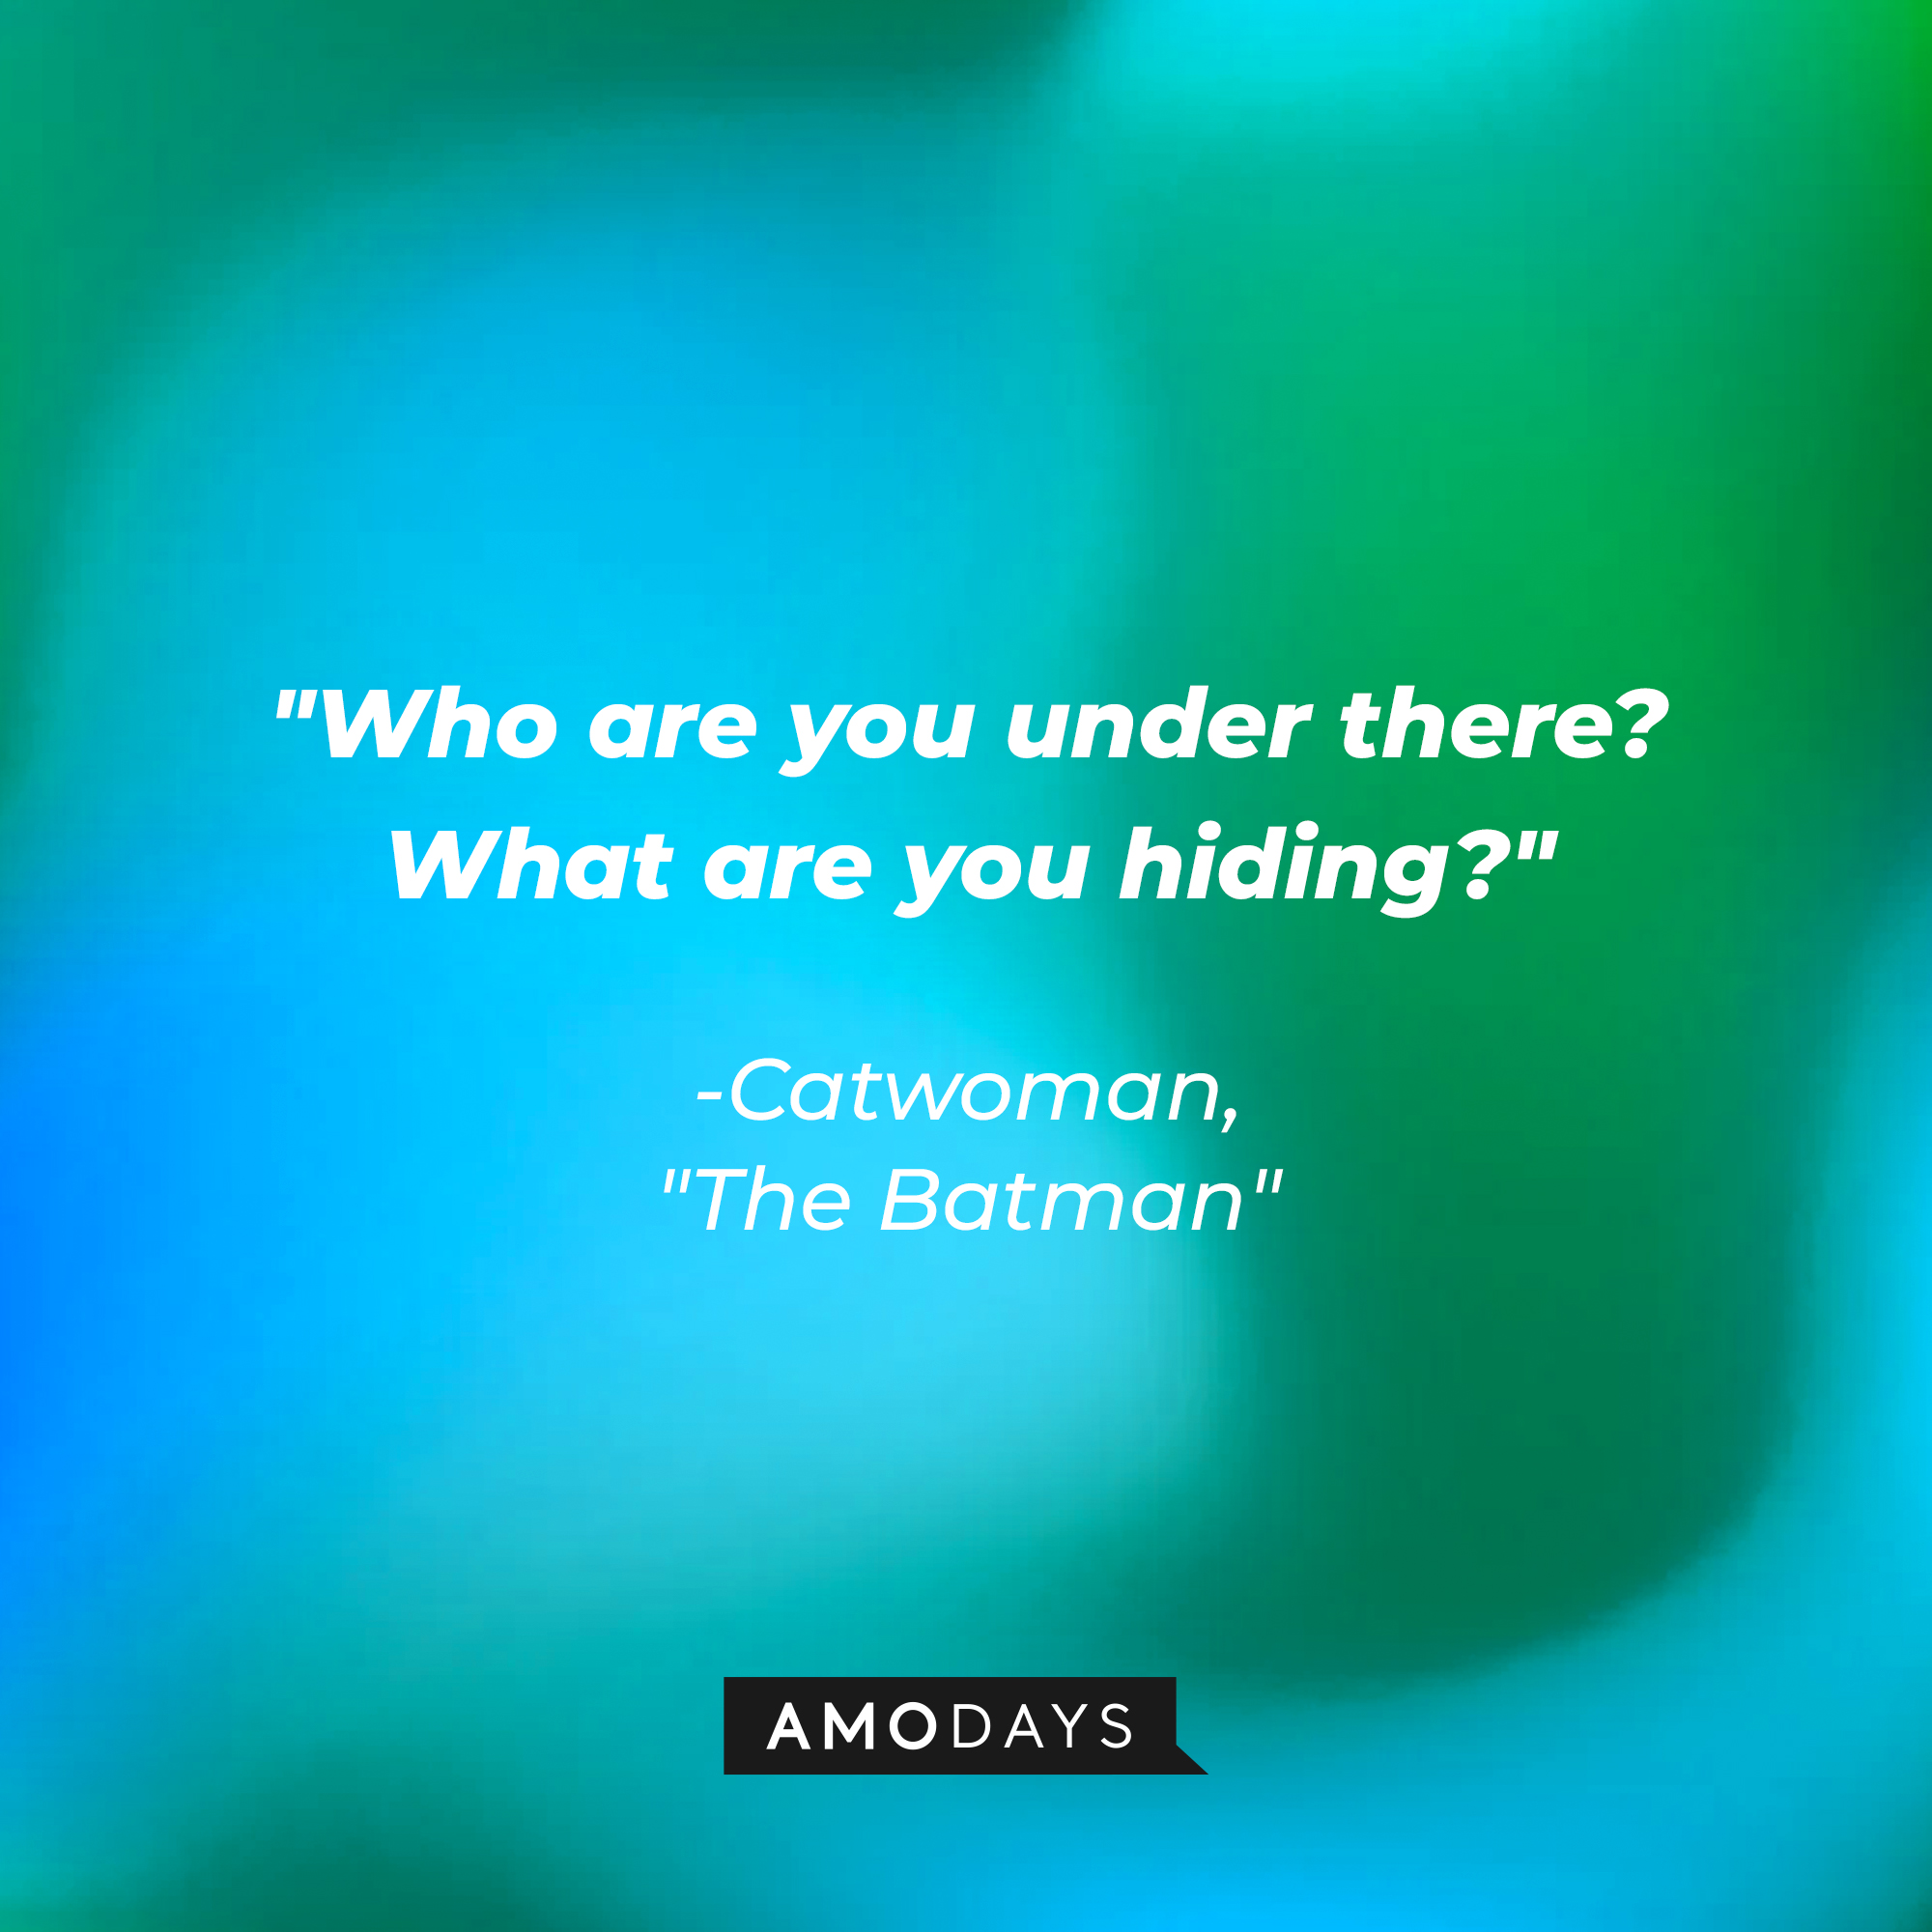 Catwoman’s quote: "Who are you under there? What are you hiding?" | Image: AmoDays